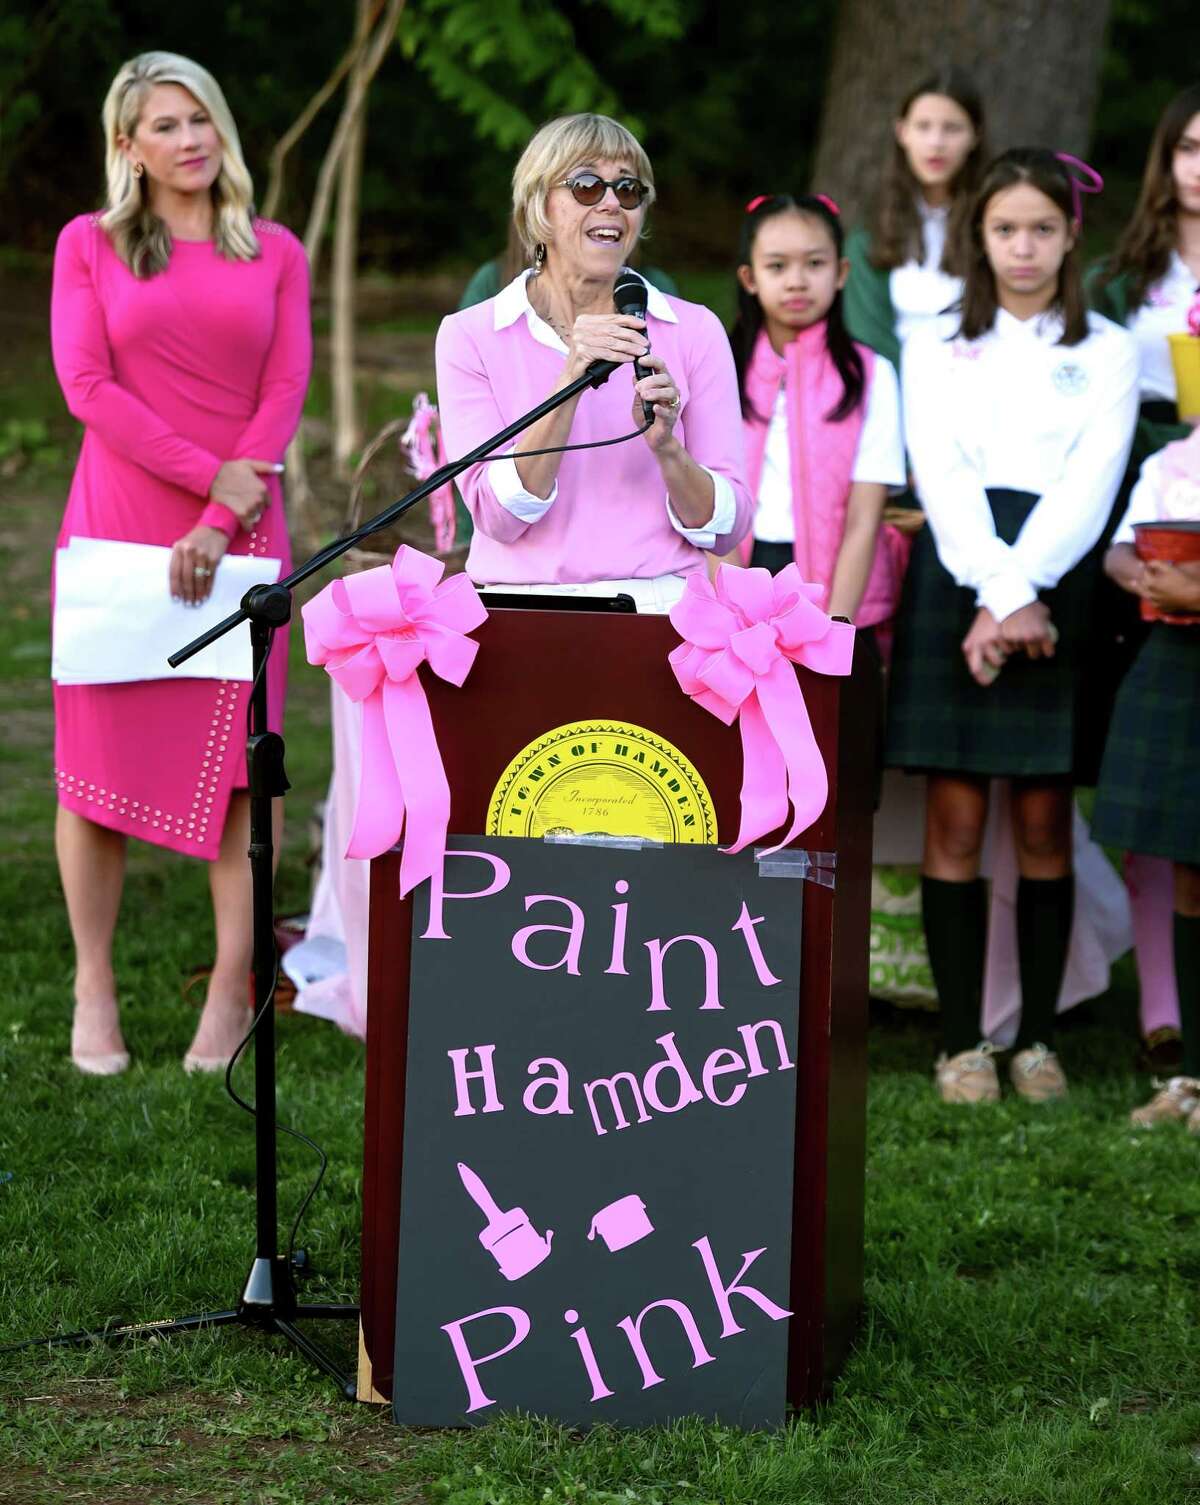 Breast cancer survivor Sheila Malony, professor of nursing at Quinnipiac University, speaks at the dedication of a memorial garden for those lost to breast cancer in Hamden Town Center Park on September 28, 2022 that included the unveiling of a granite bench